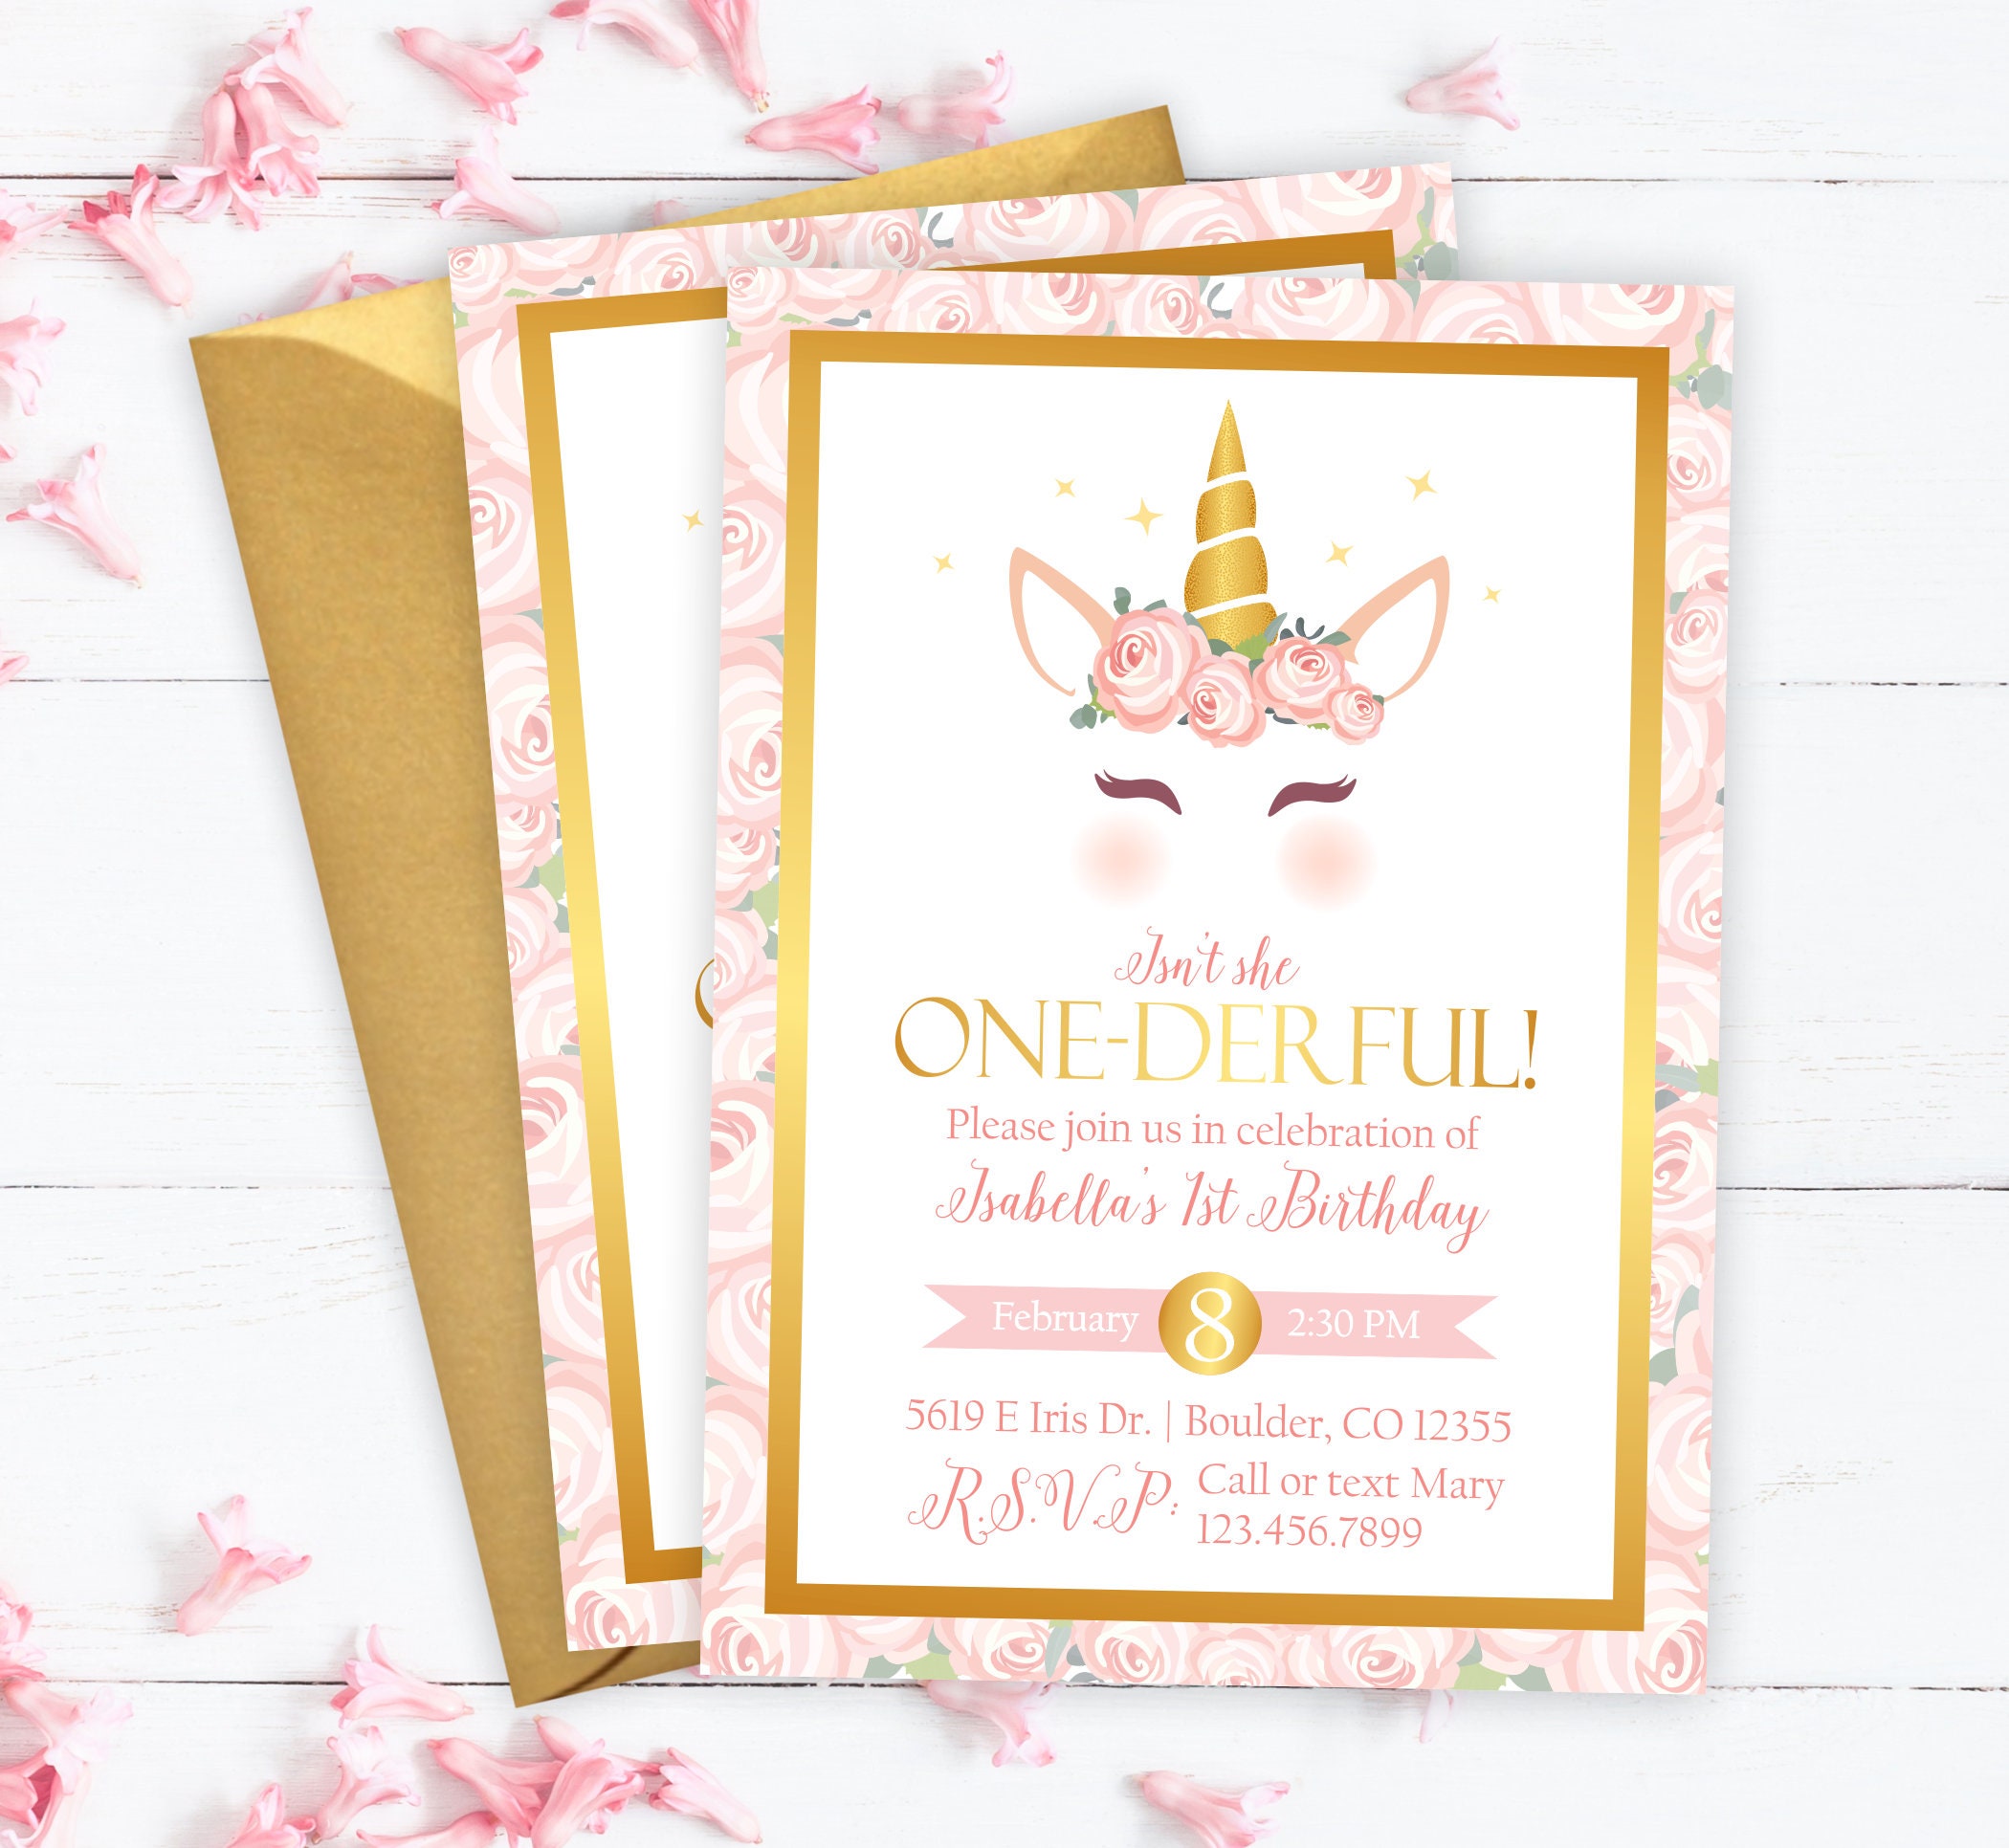 Age Personalized Unicorn Birthday Invitation Unicorn Invitations Info and Envelope Color Birthday Invites for Girls Your choice of Quantity